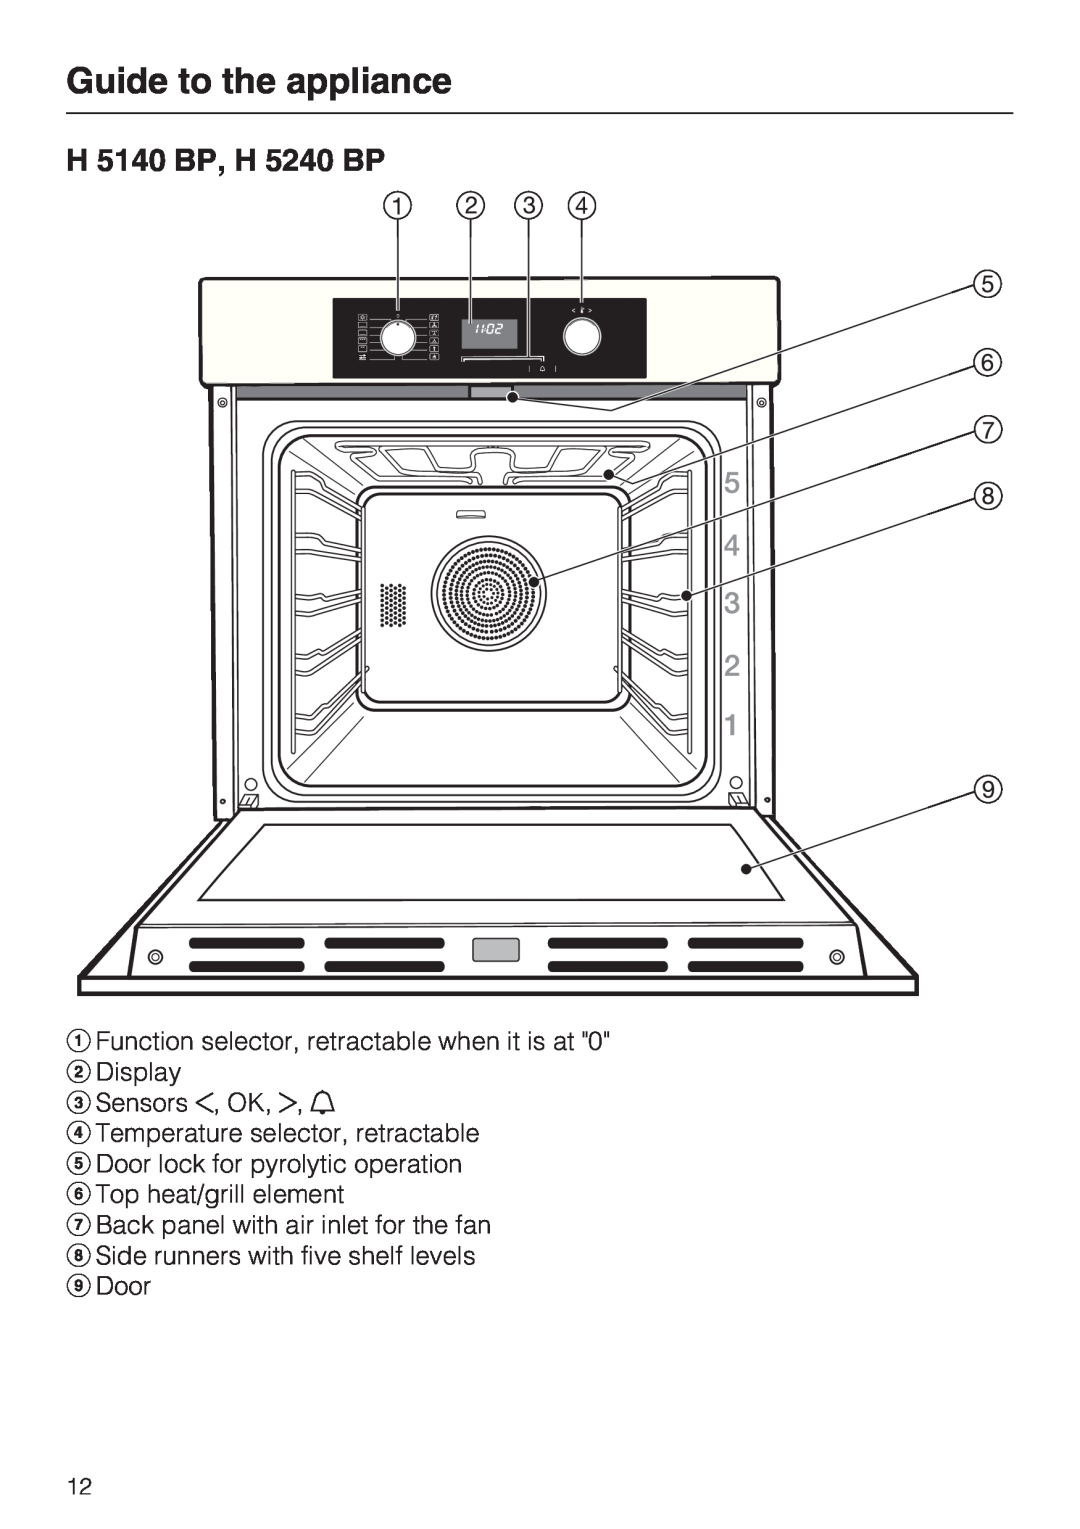 Miele installation instructions Guide to the appliance, H 5140 BP, H 5240 BP 